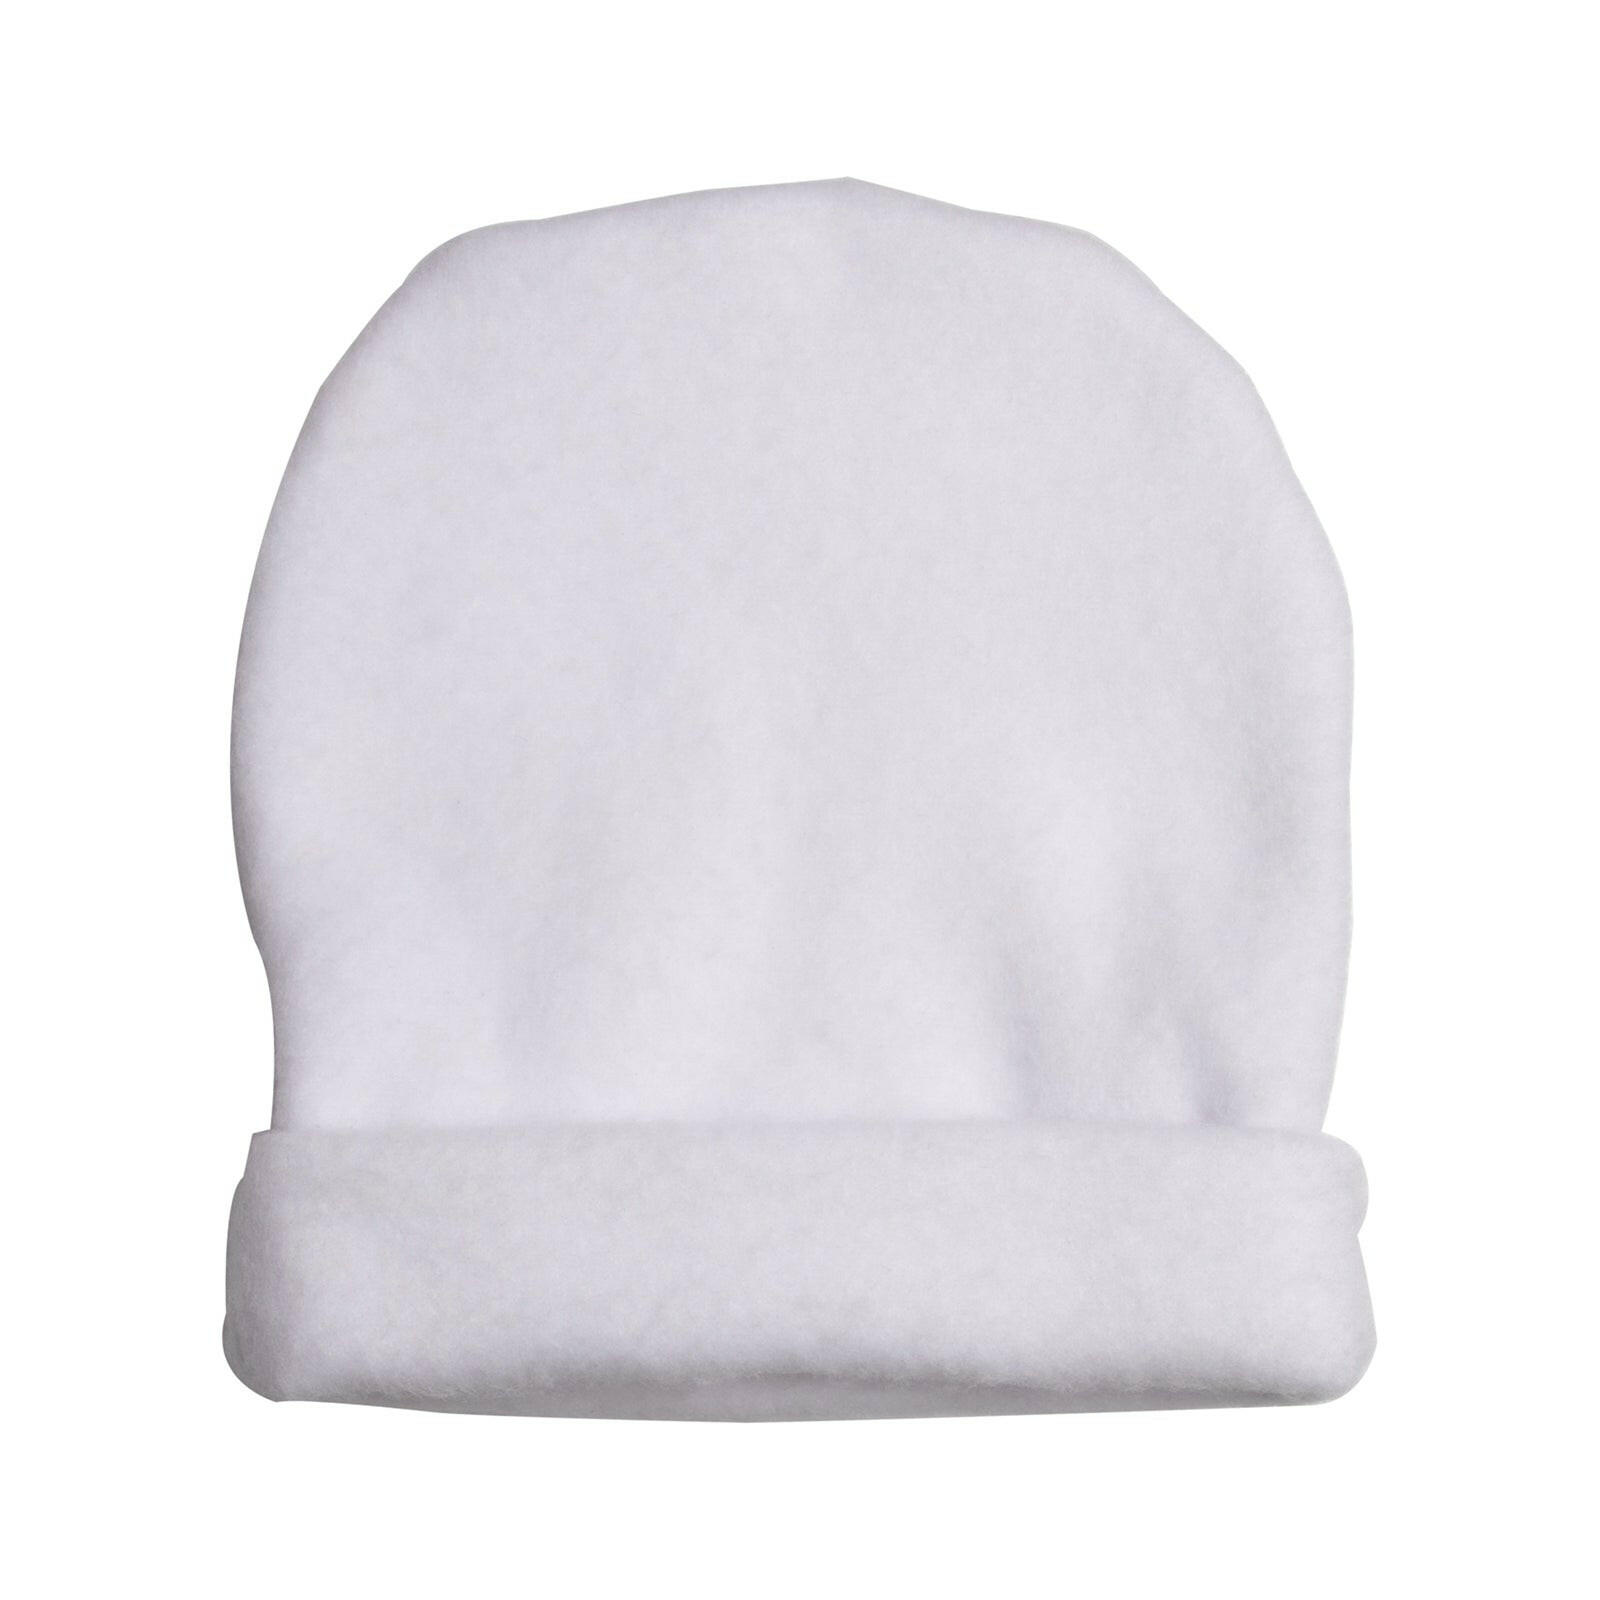 Fleece Sublimation Baby Hats - 4 Pack.